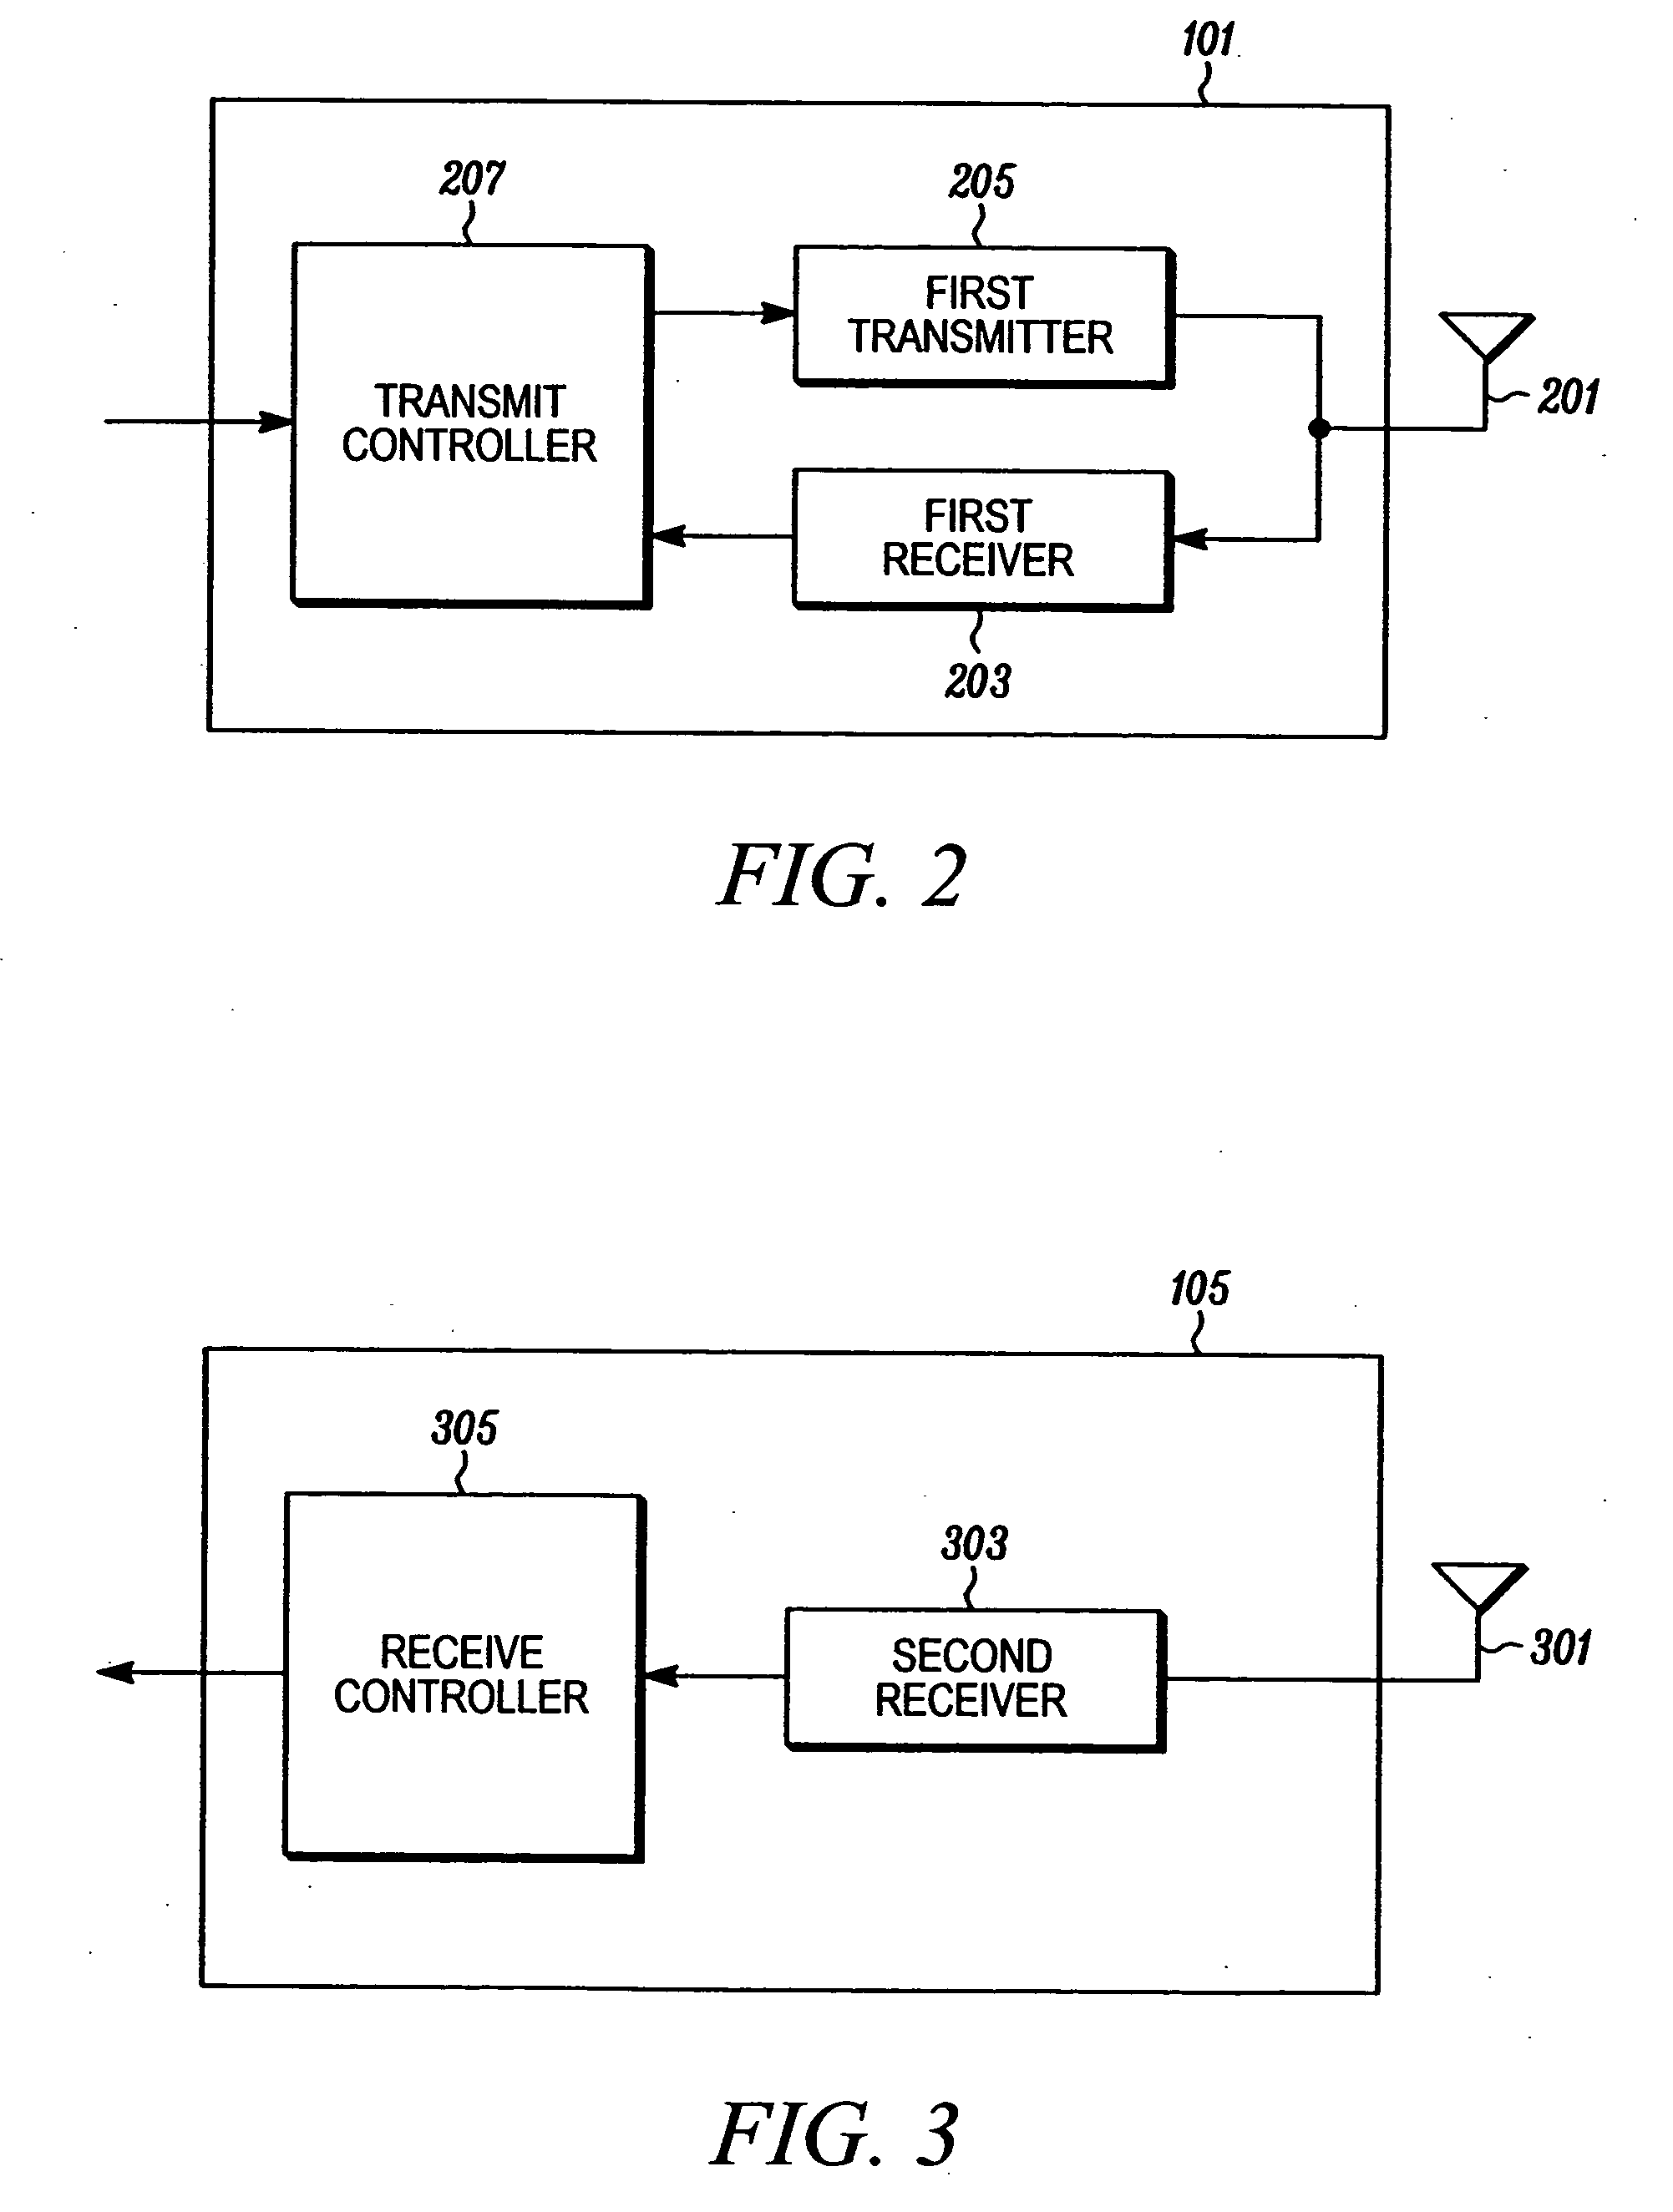 Method and apparatus for uplink communication in a cellular communication system